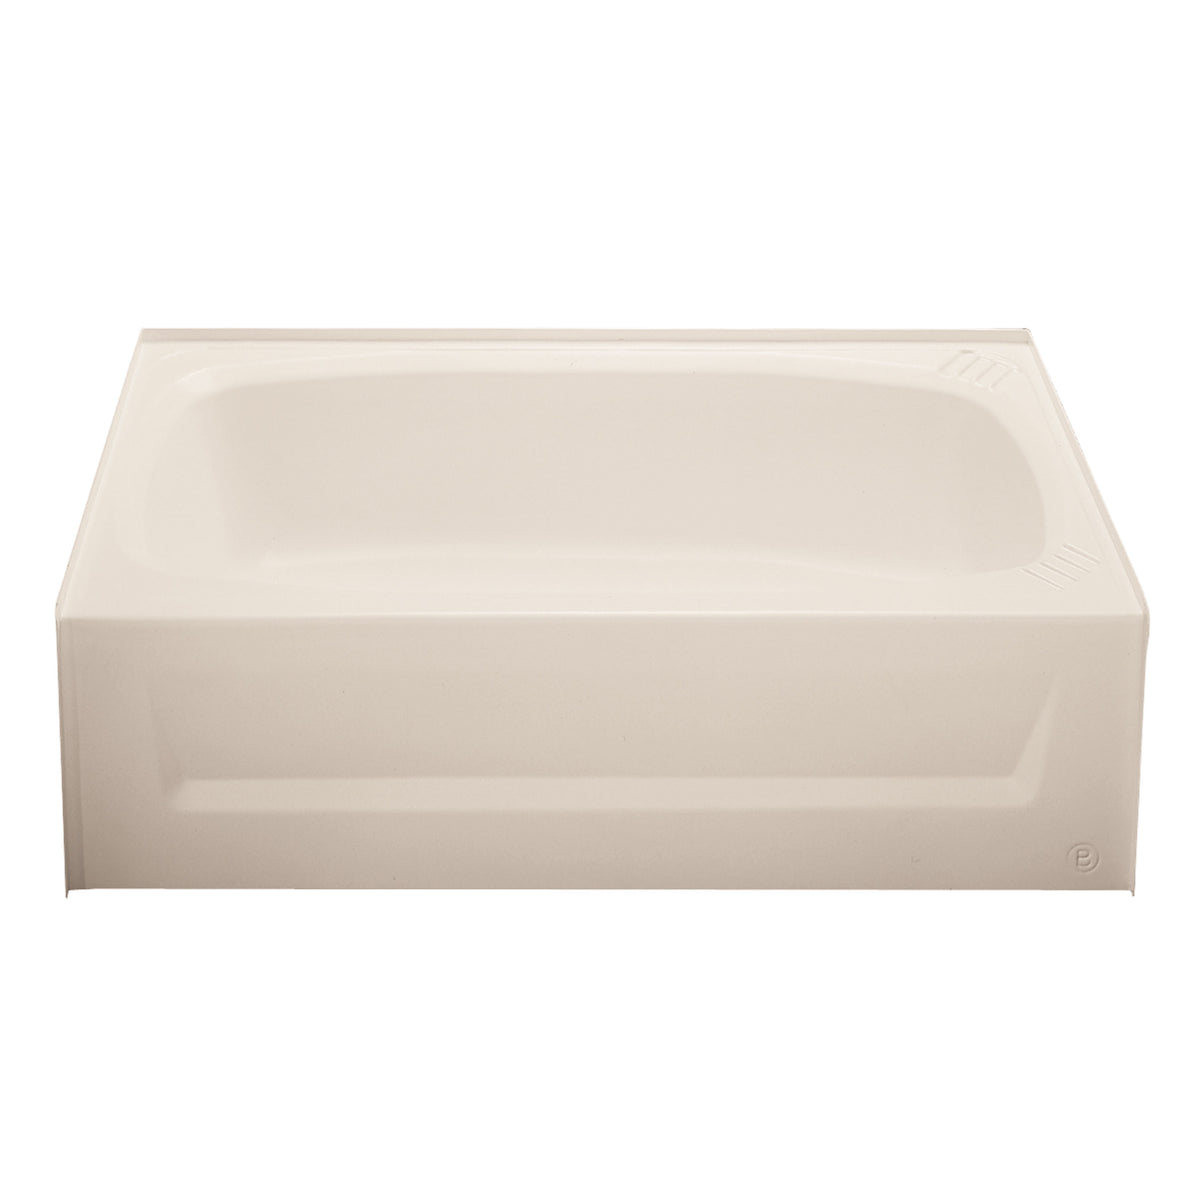 Kinro ALM2754A LH-SPK ABS Bath Tub with Apron - 27 in. x 54 in., Left Hand, Almond